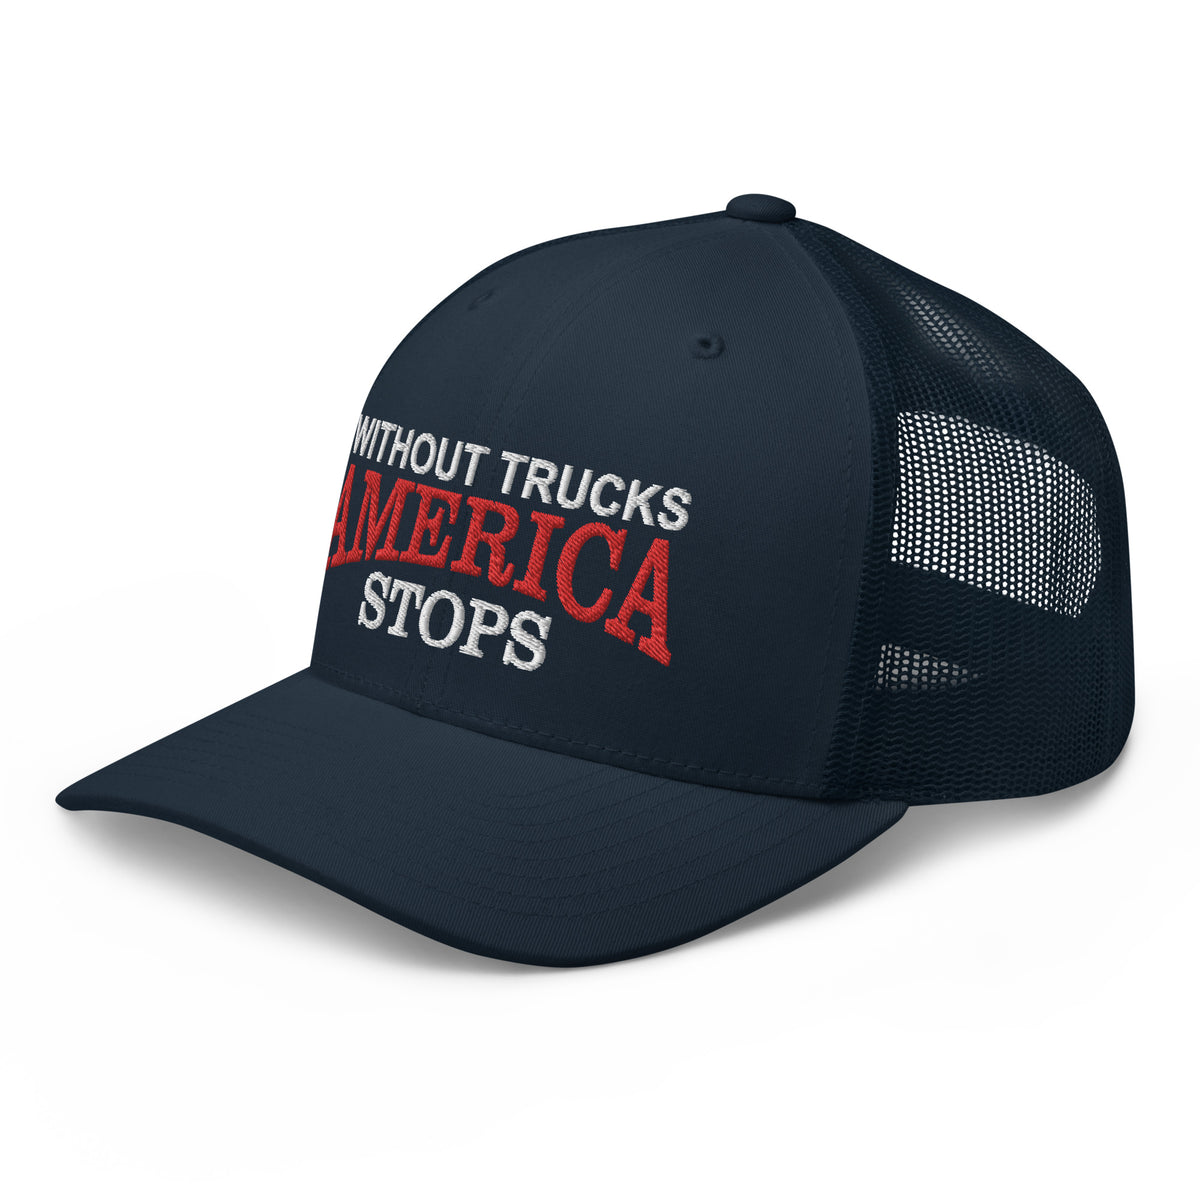 Without Trucks America Stops - Embroidered Hat - Free Shipping